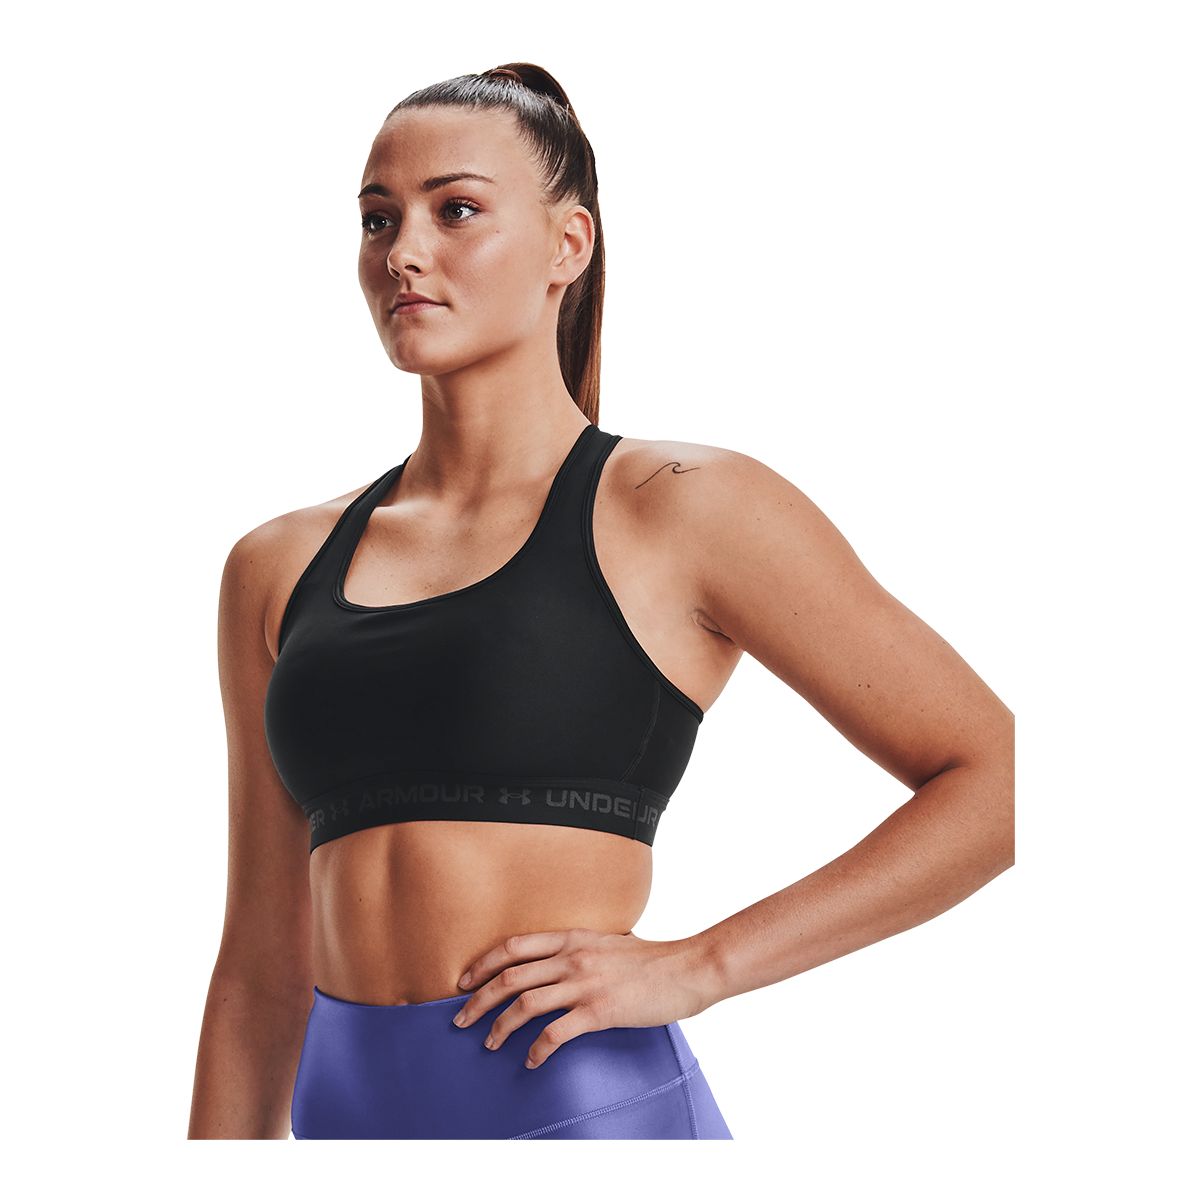 Under Armour Sports Bra Multiple Size XS - $8 (68% Off Retail) - From Reece